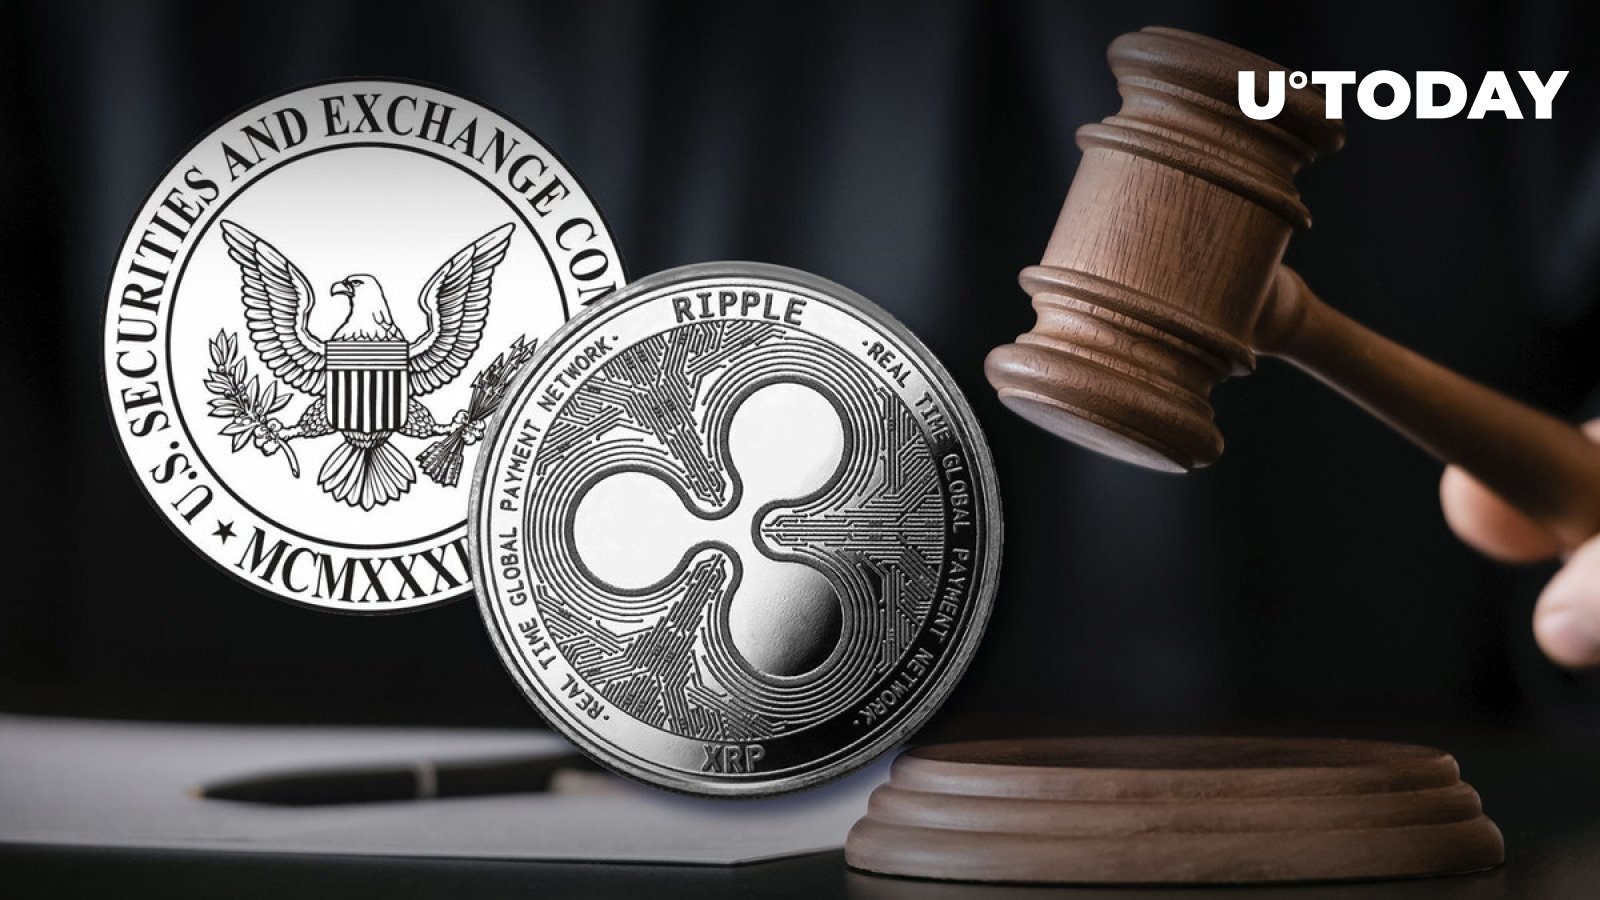 Ripple CEO Says SEC’s “Shamefulness” Will Shock You